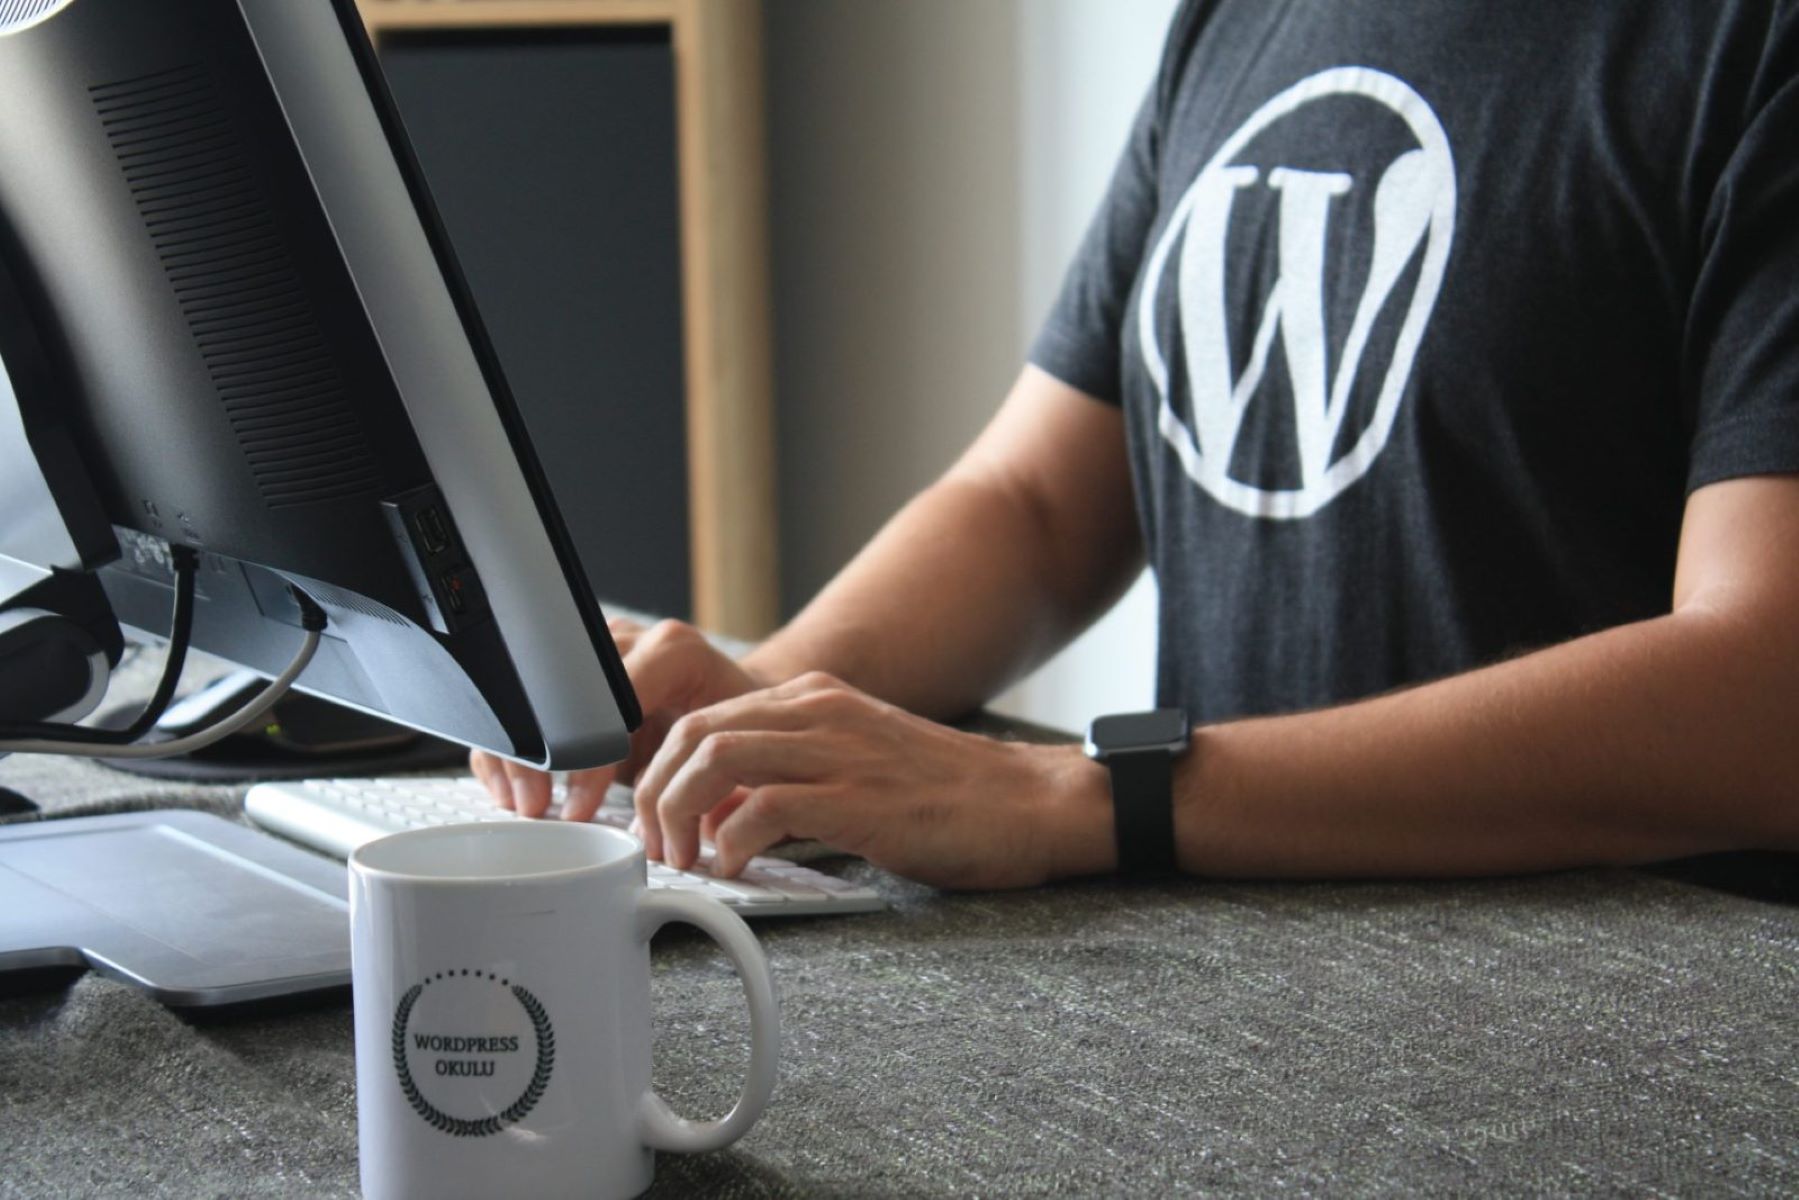 new-seo-title-wordpress-introduces-100-year-domain-registration-plan-for-long-term-digital-preservation